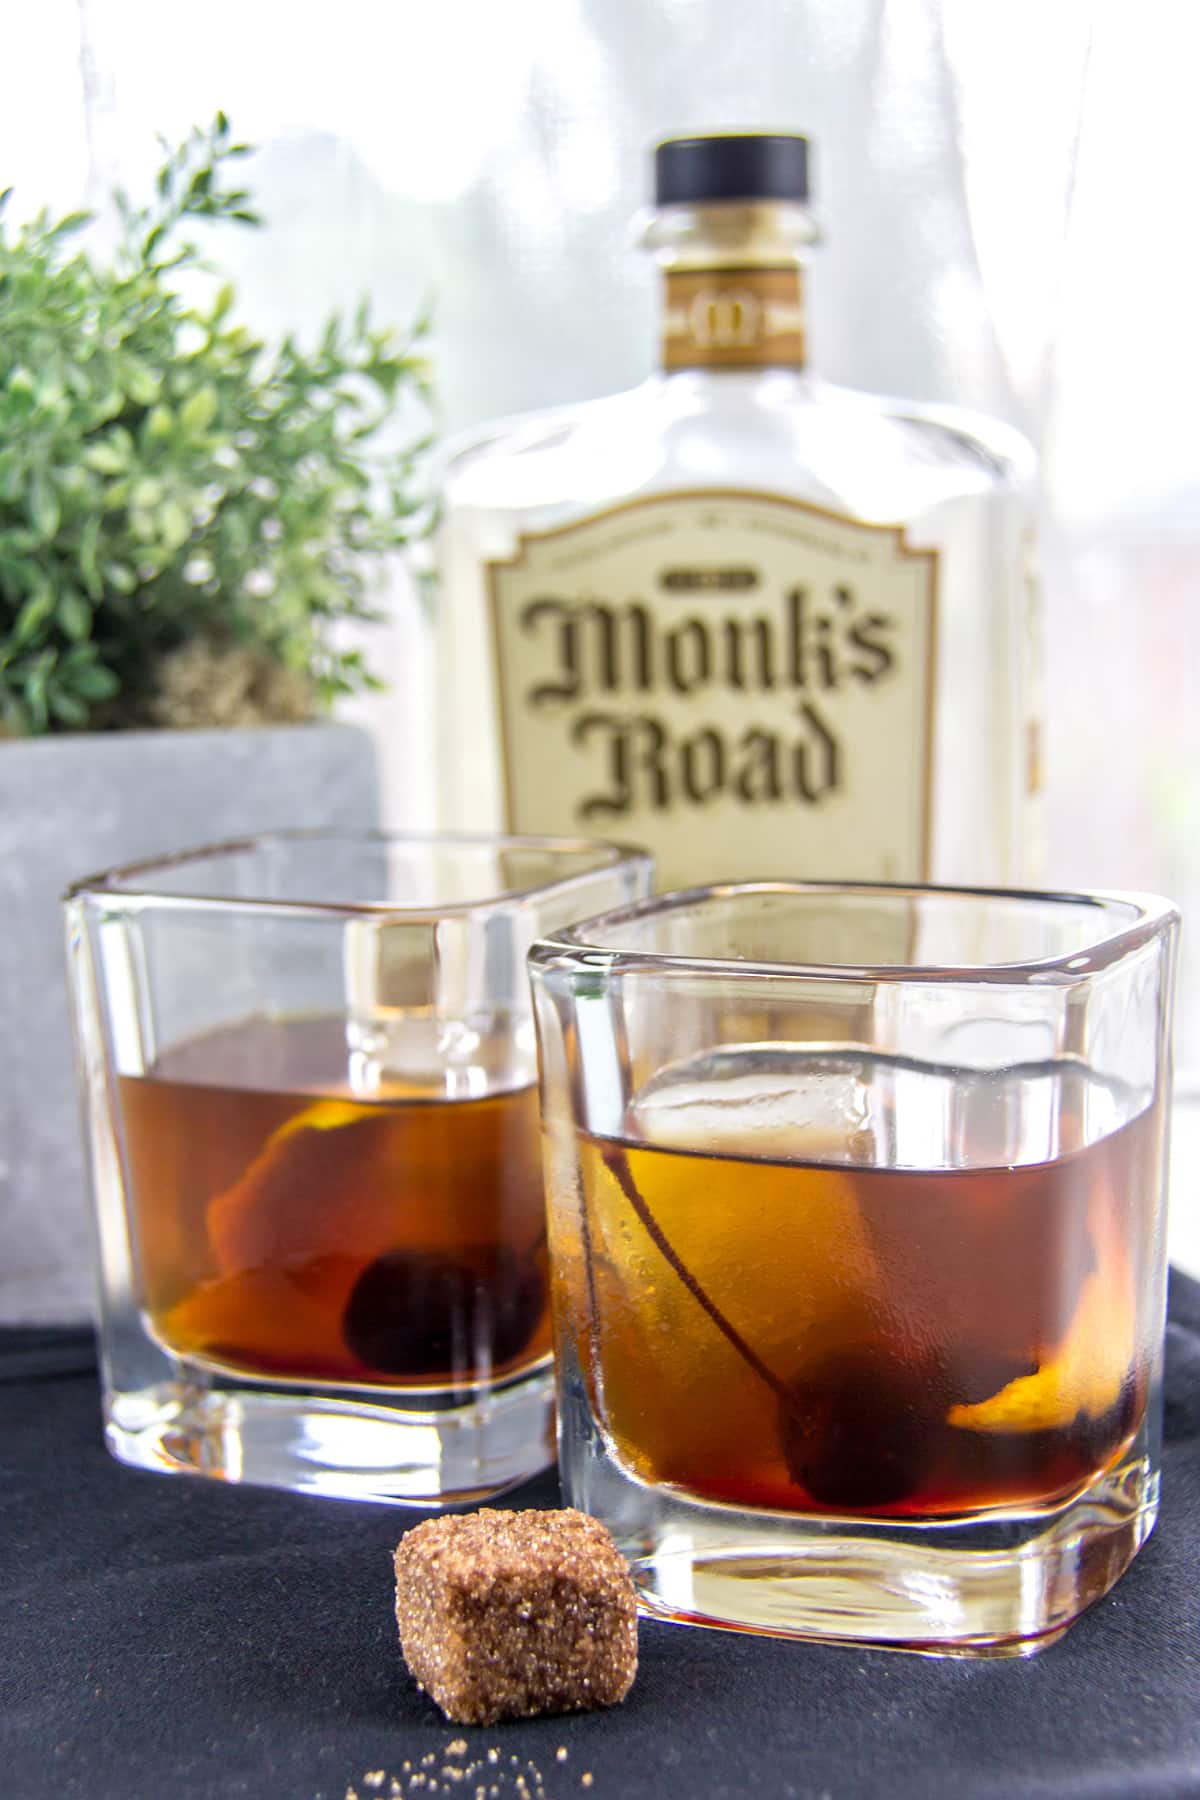 an old fashioned made with Monks Road small batch and Your Grandpas old fashioned cubes